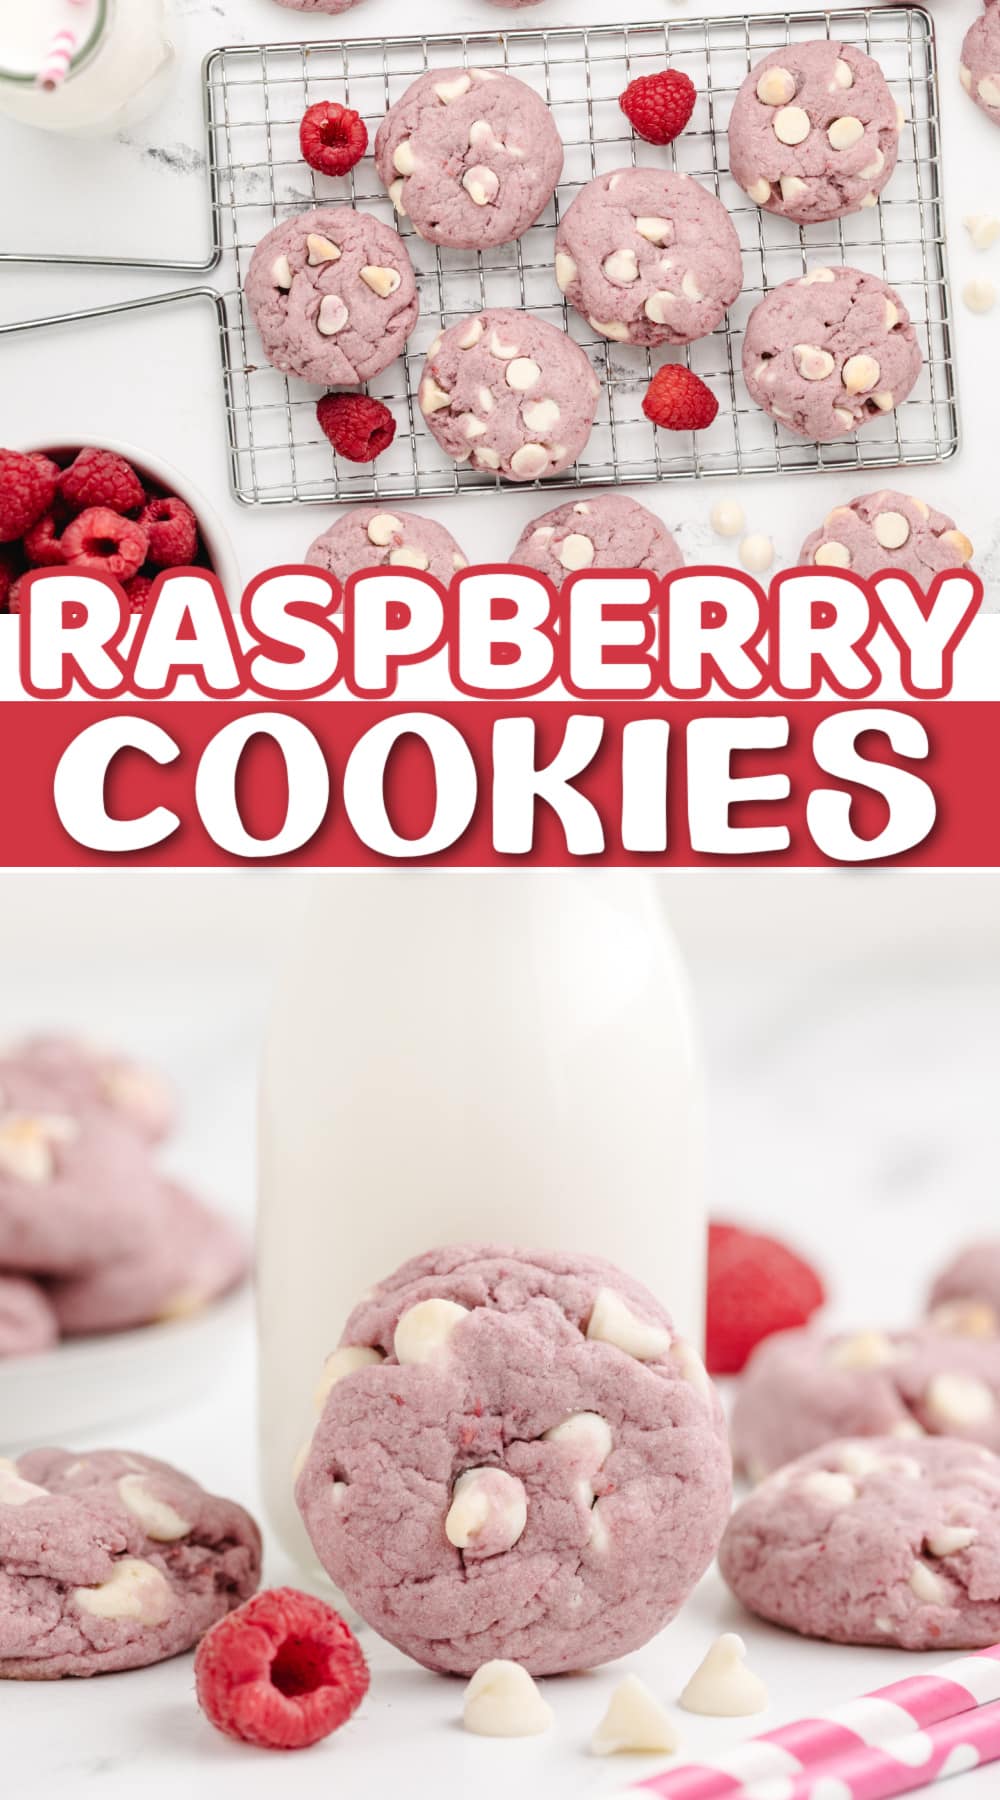 Raspberry Cookies made with frozen raspberries and white chocolate chips. Simple raspberry cookie recipe yields soft and chewy cookies that are perfectly pink! 